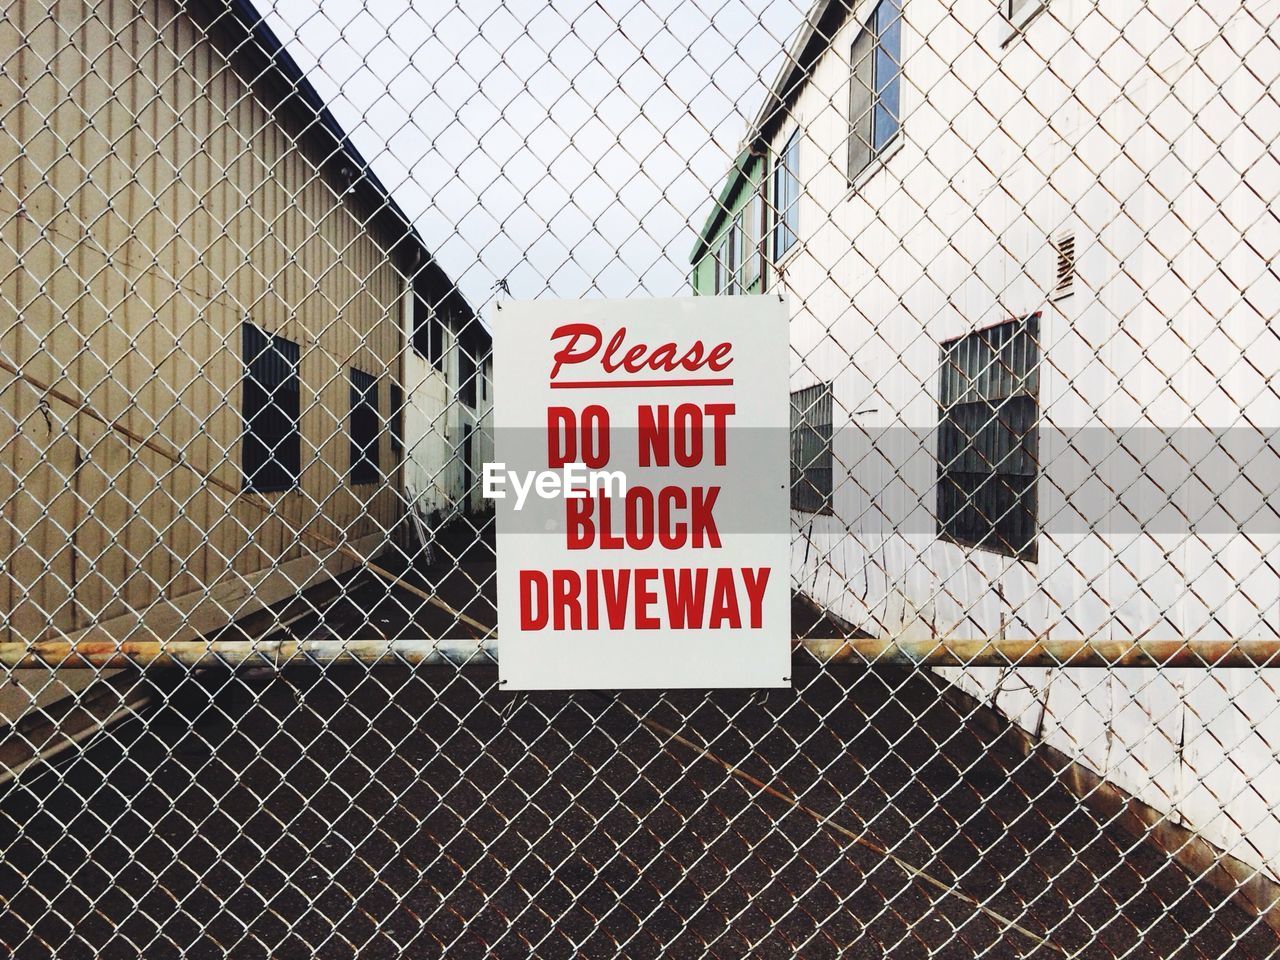 Sign on chainlink fence against buildings